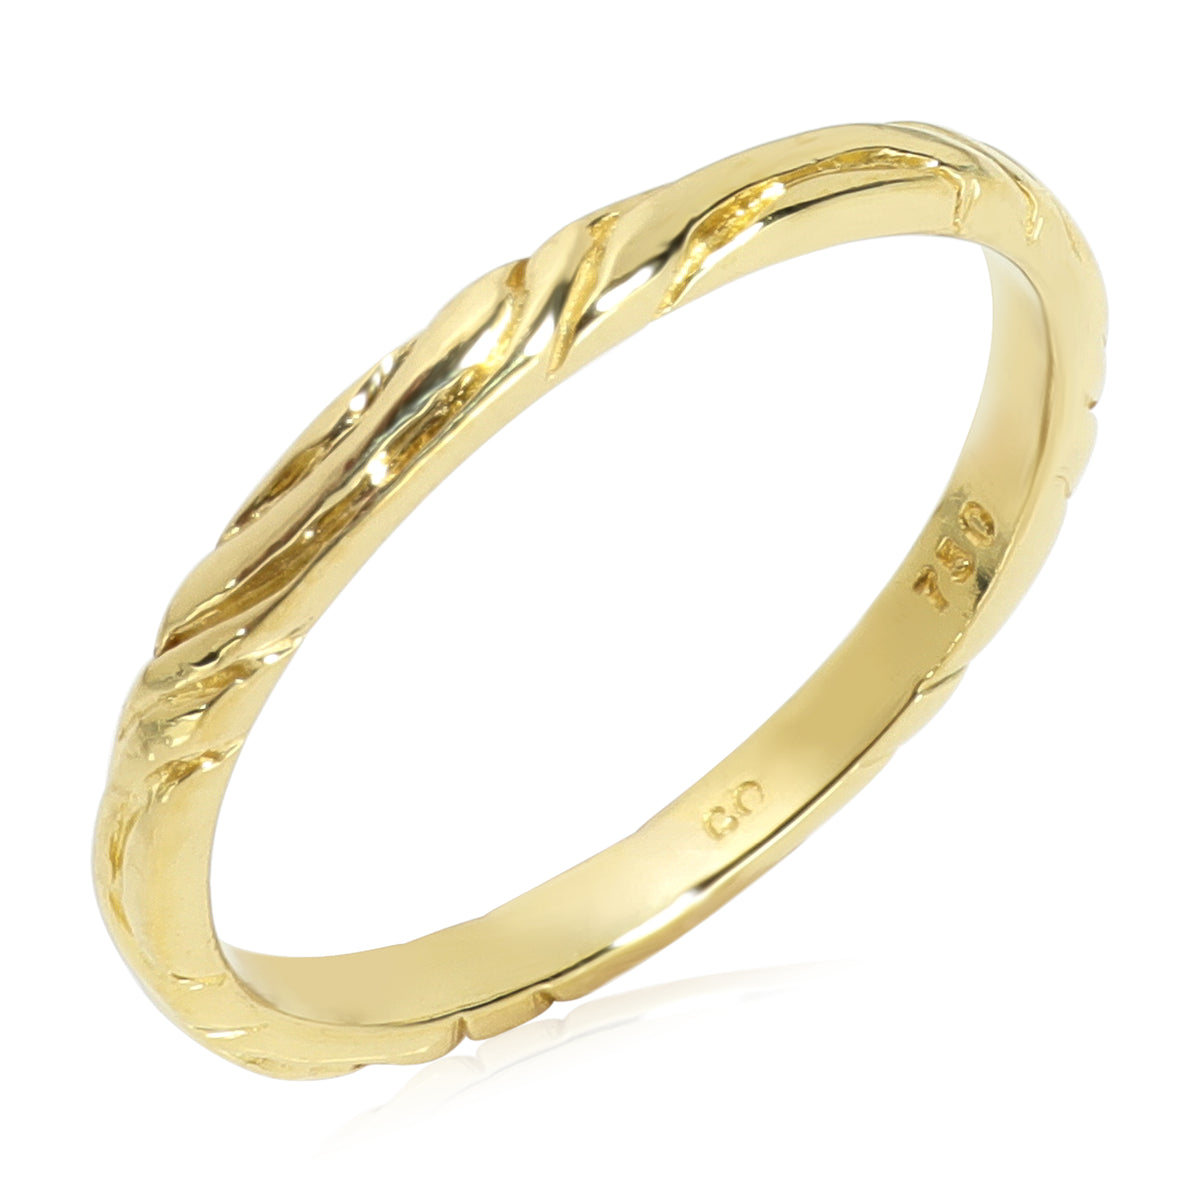 Hidalgo Wave Band in 18k Yellow Gold